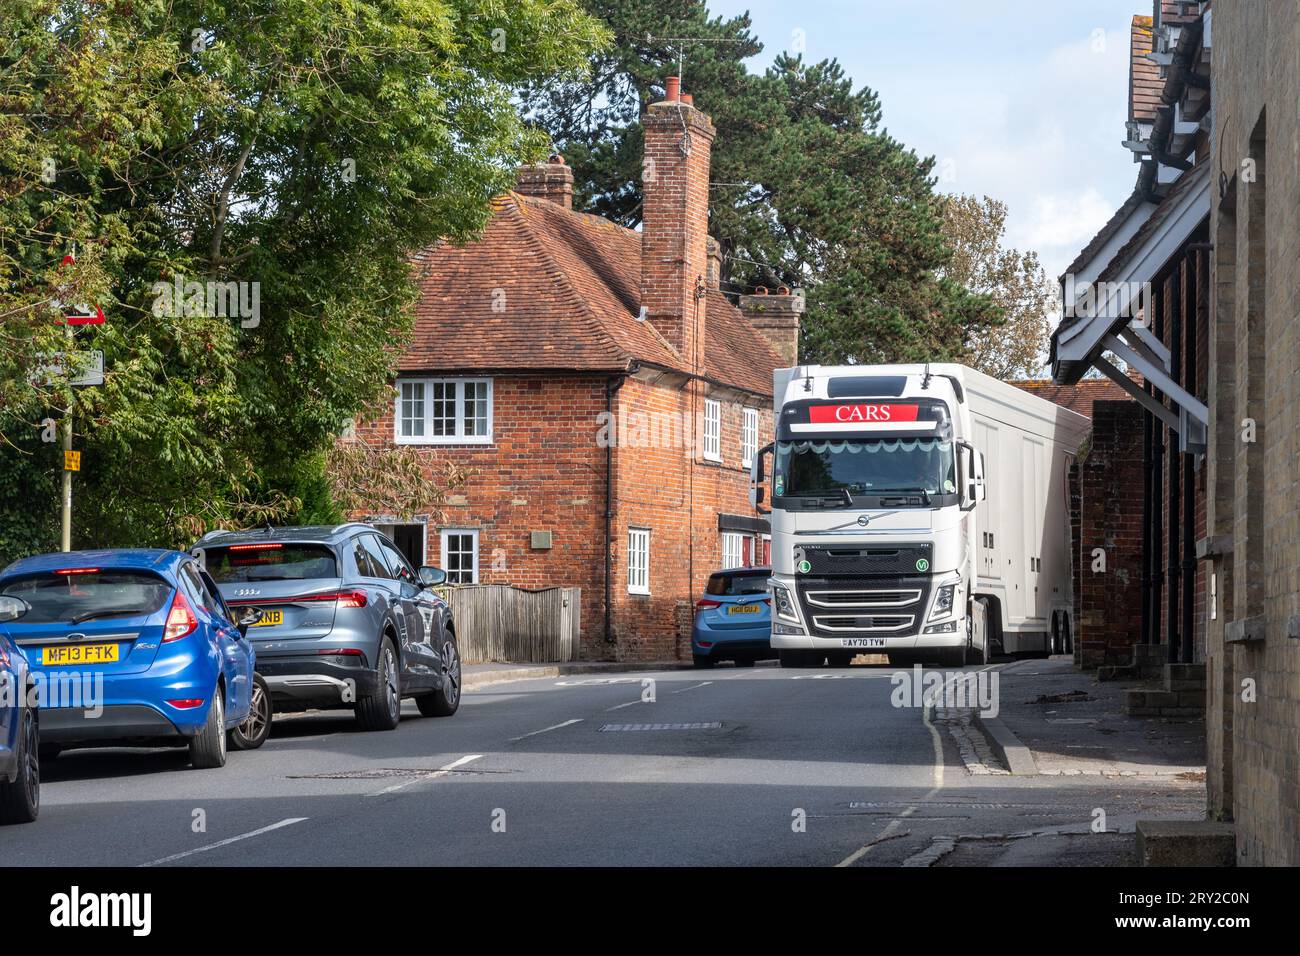 Beaulieu village in the New Forest, Hampshire, England, UK. A large lorry trying to manoeuvre past a car on the narrow road Stock Photo